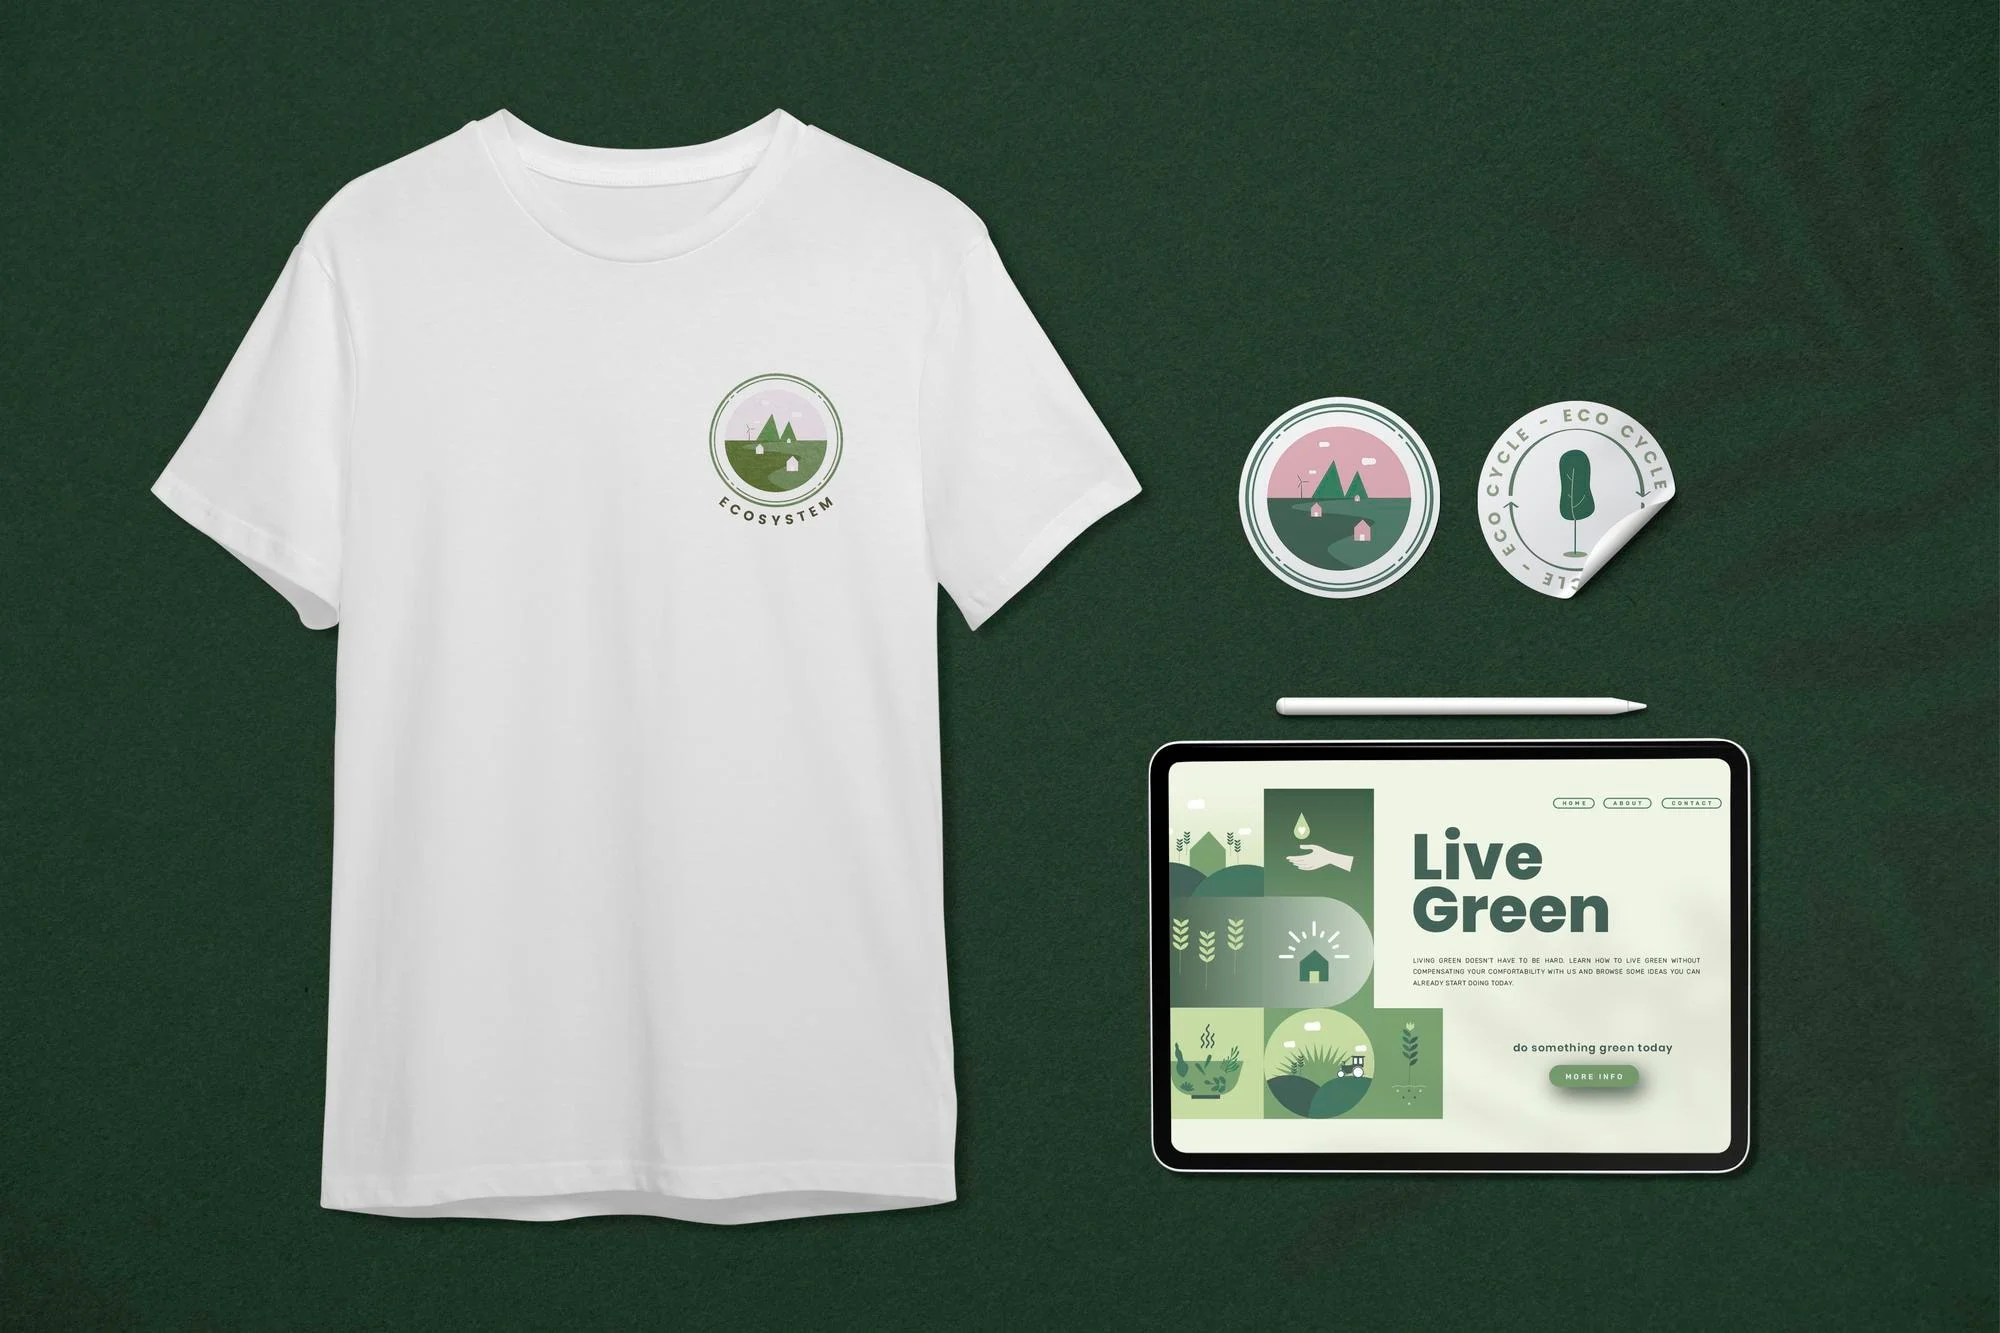 corporate identity psd mockup set with t shirt tablet sticker 53876 138256